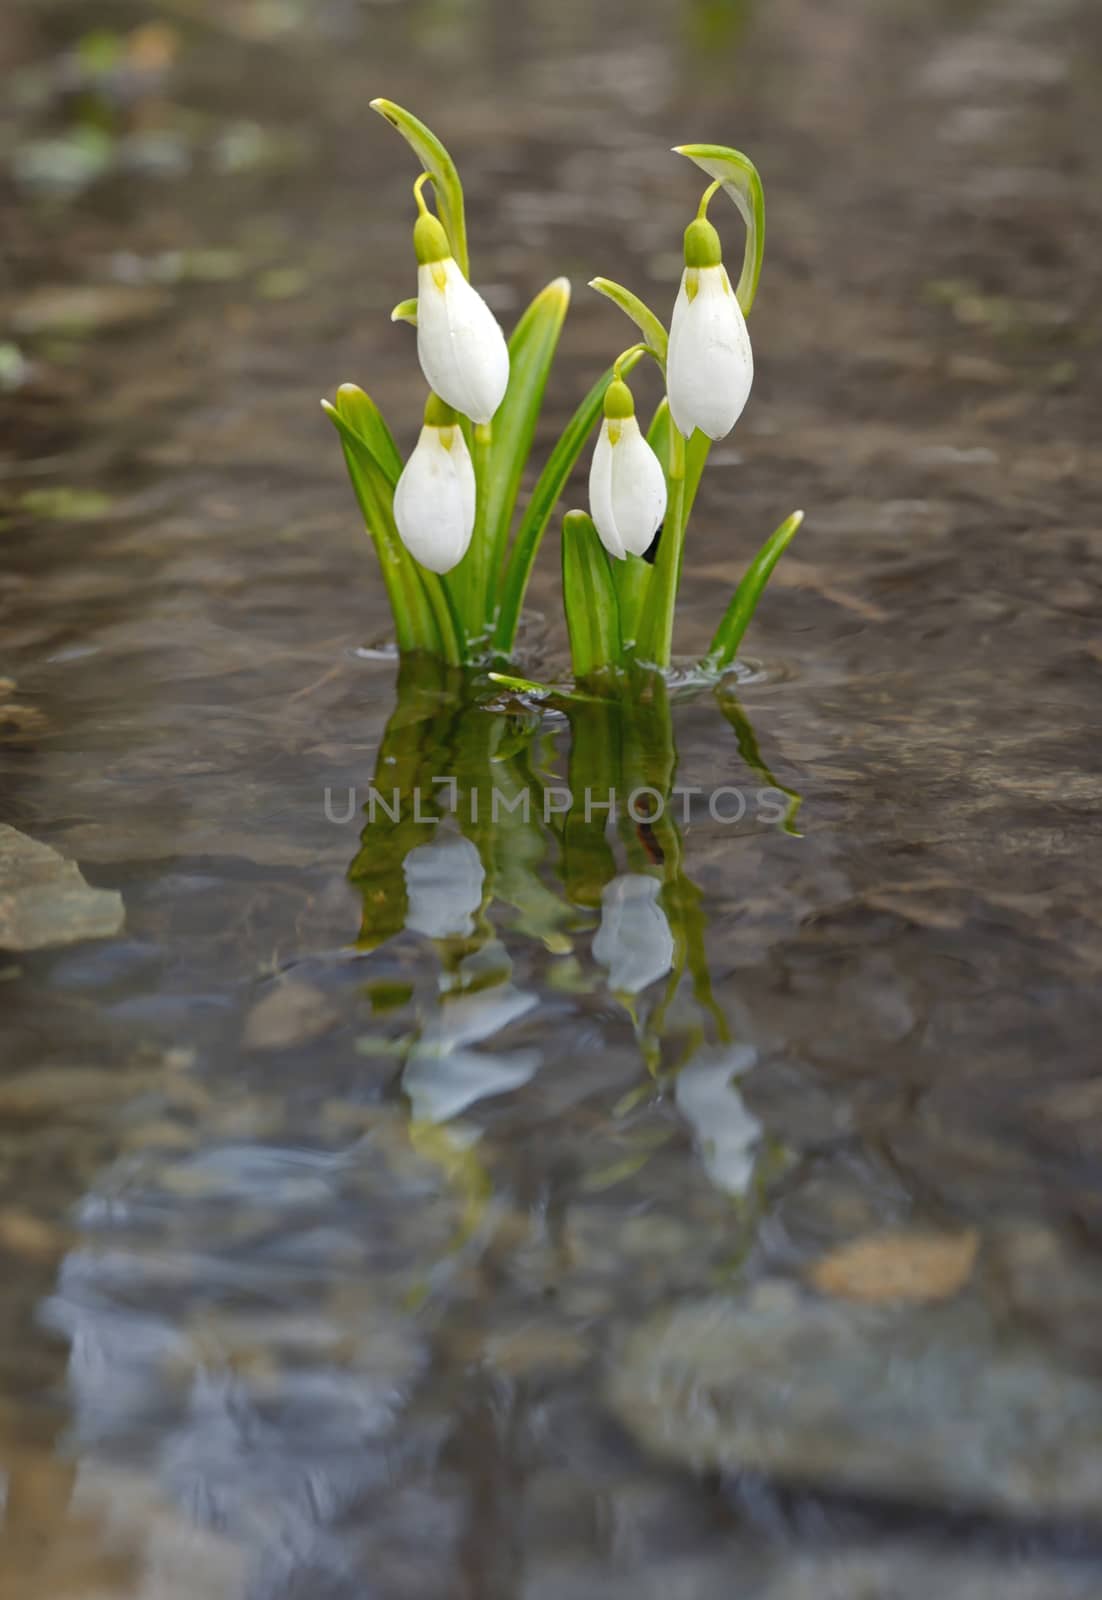 Snowdrops reflection in the spring water